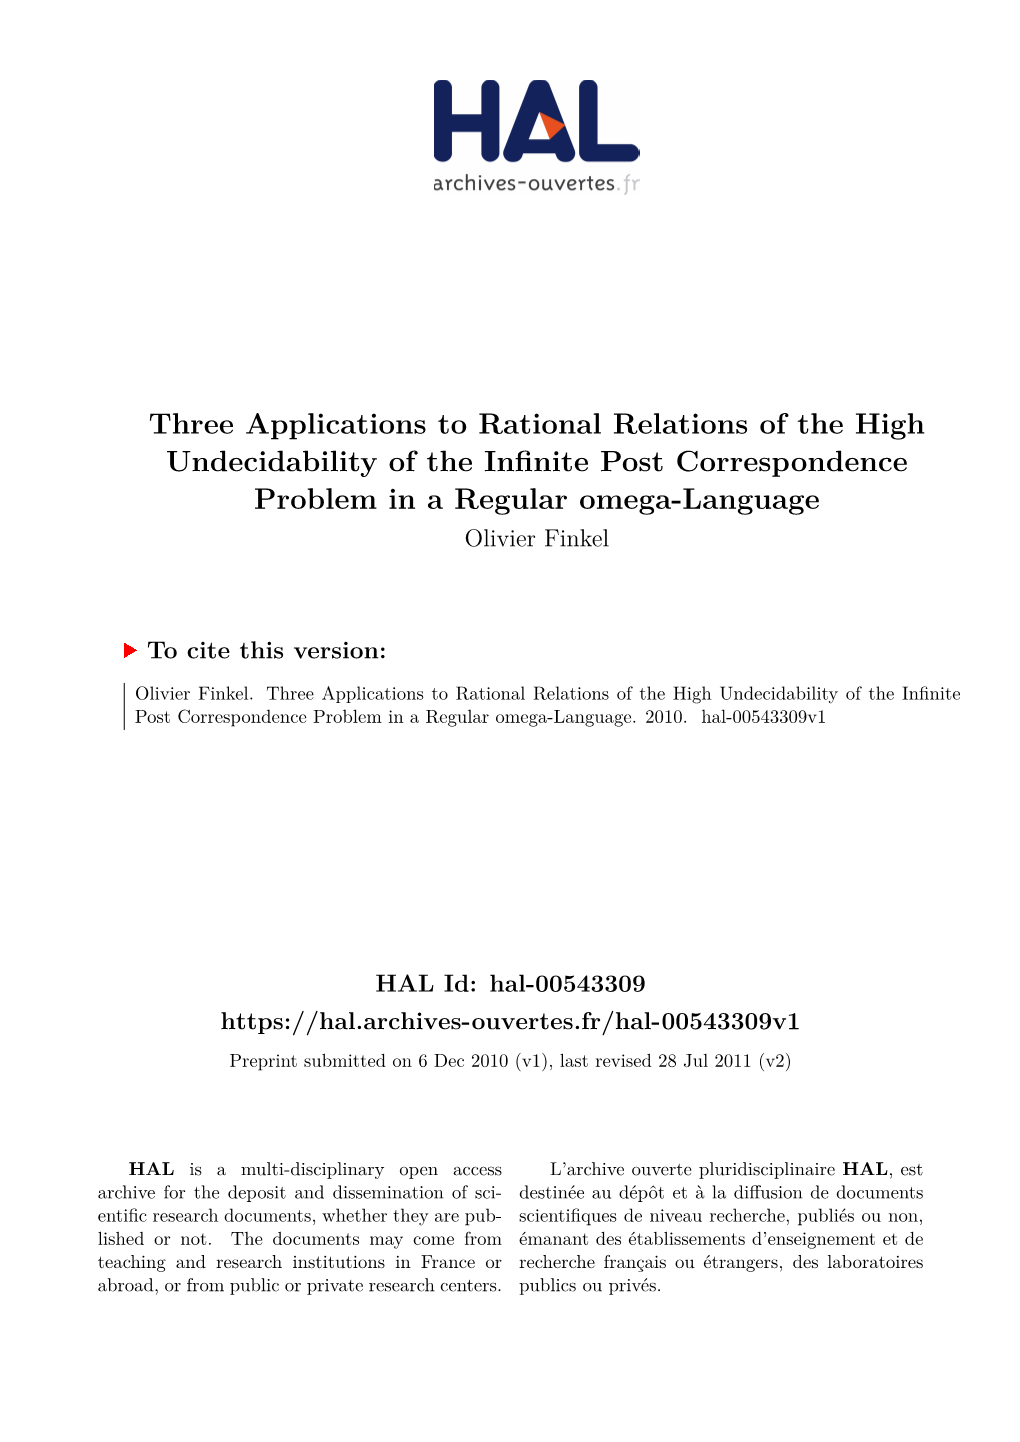 Three Applications to Rational Relations of the High Undecidability of the Infinite Post Correspondence Problem in a Regular Omega-Language Olivier Finkel